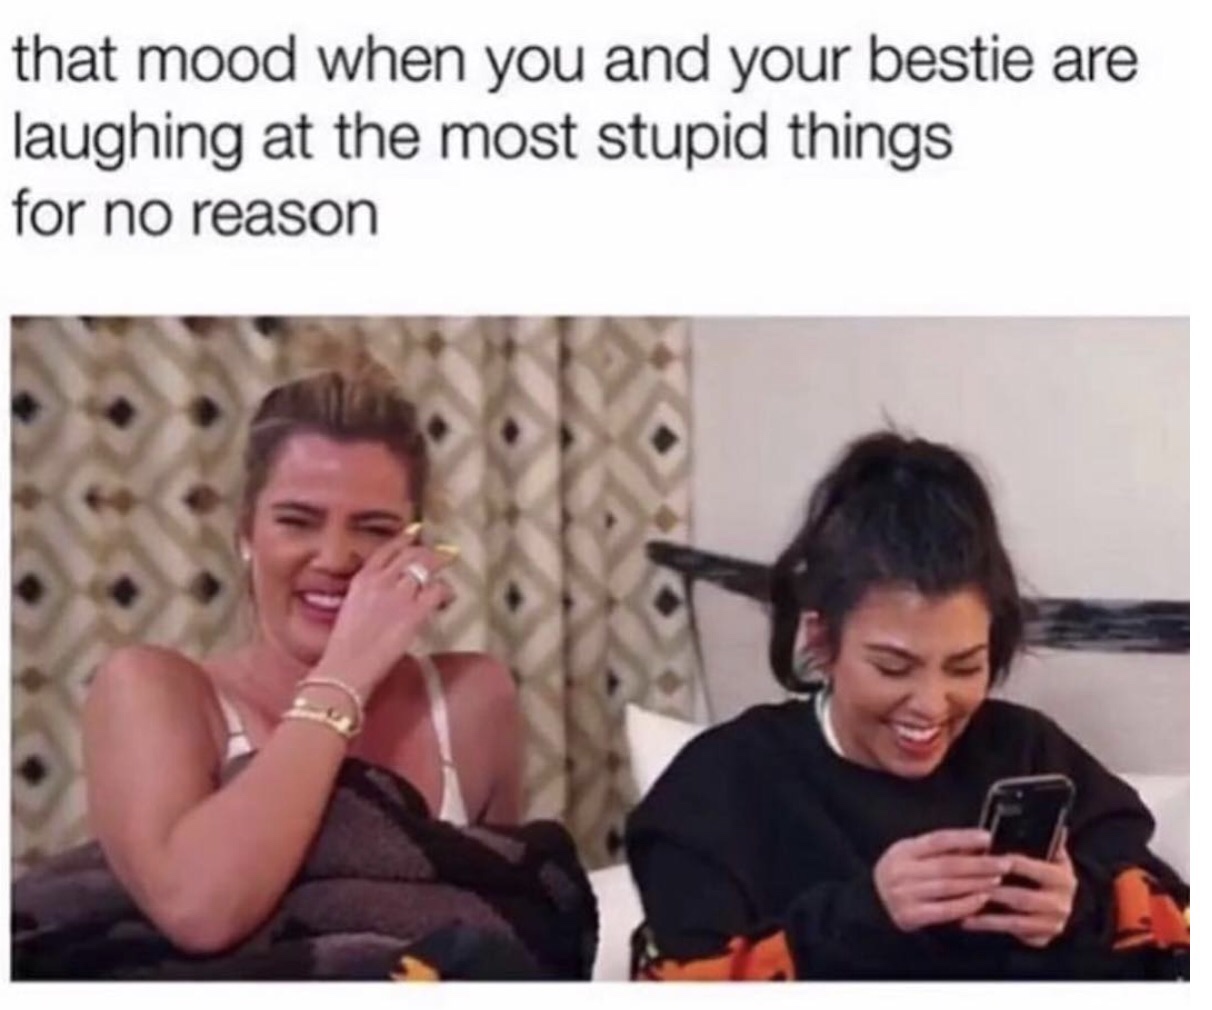 memes - biddeford savings bank - that mood when you and your bestie are laughing at the most stupid things for no reason